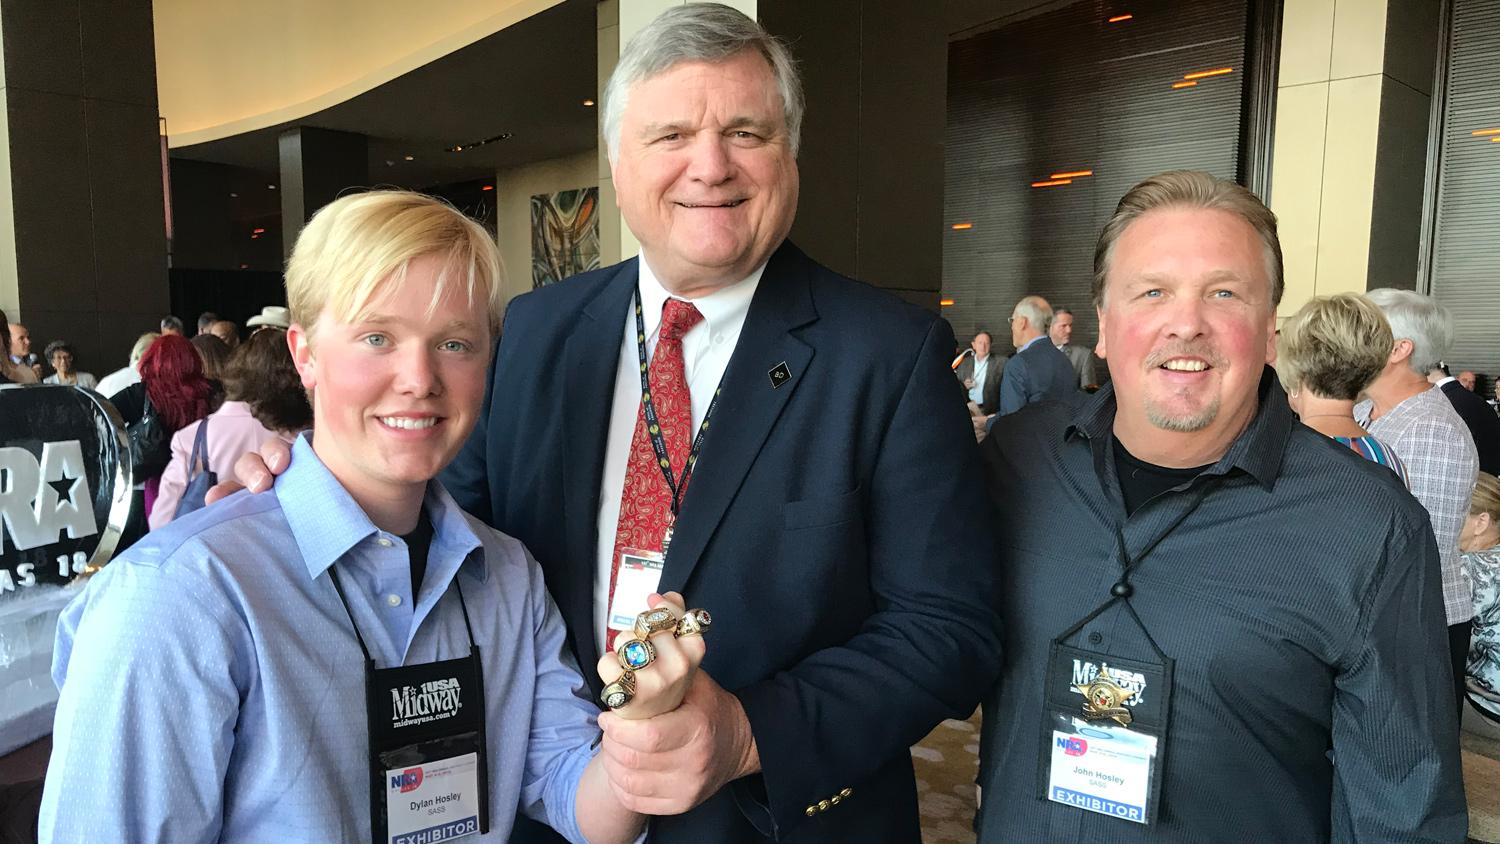 Dylan Holsey and Dave Butz at NRA Annual Meeting